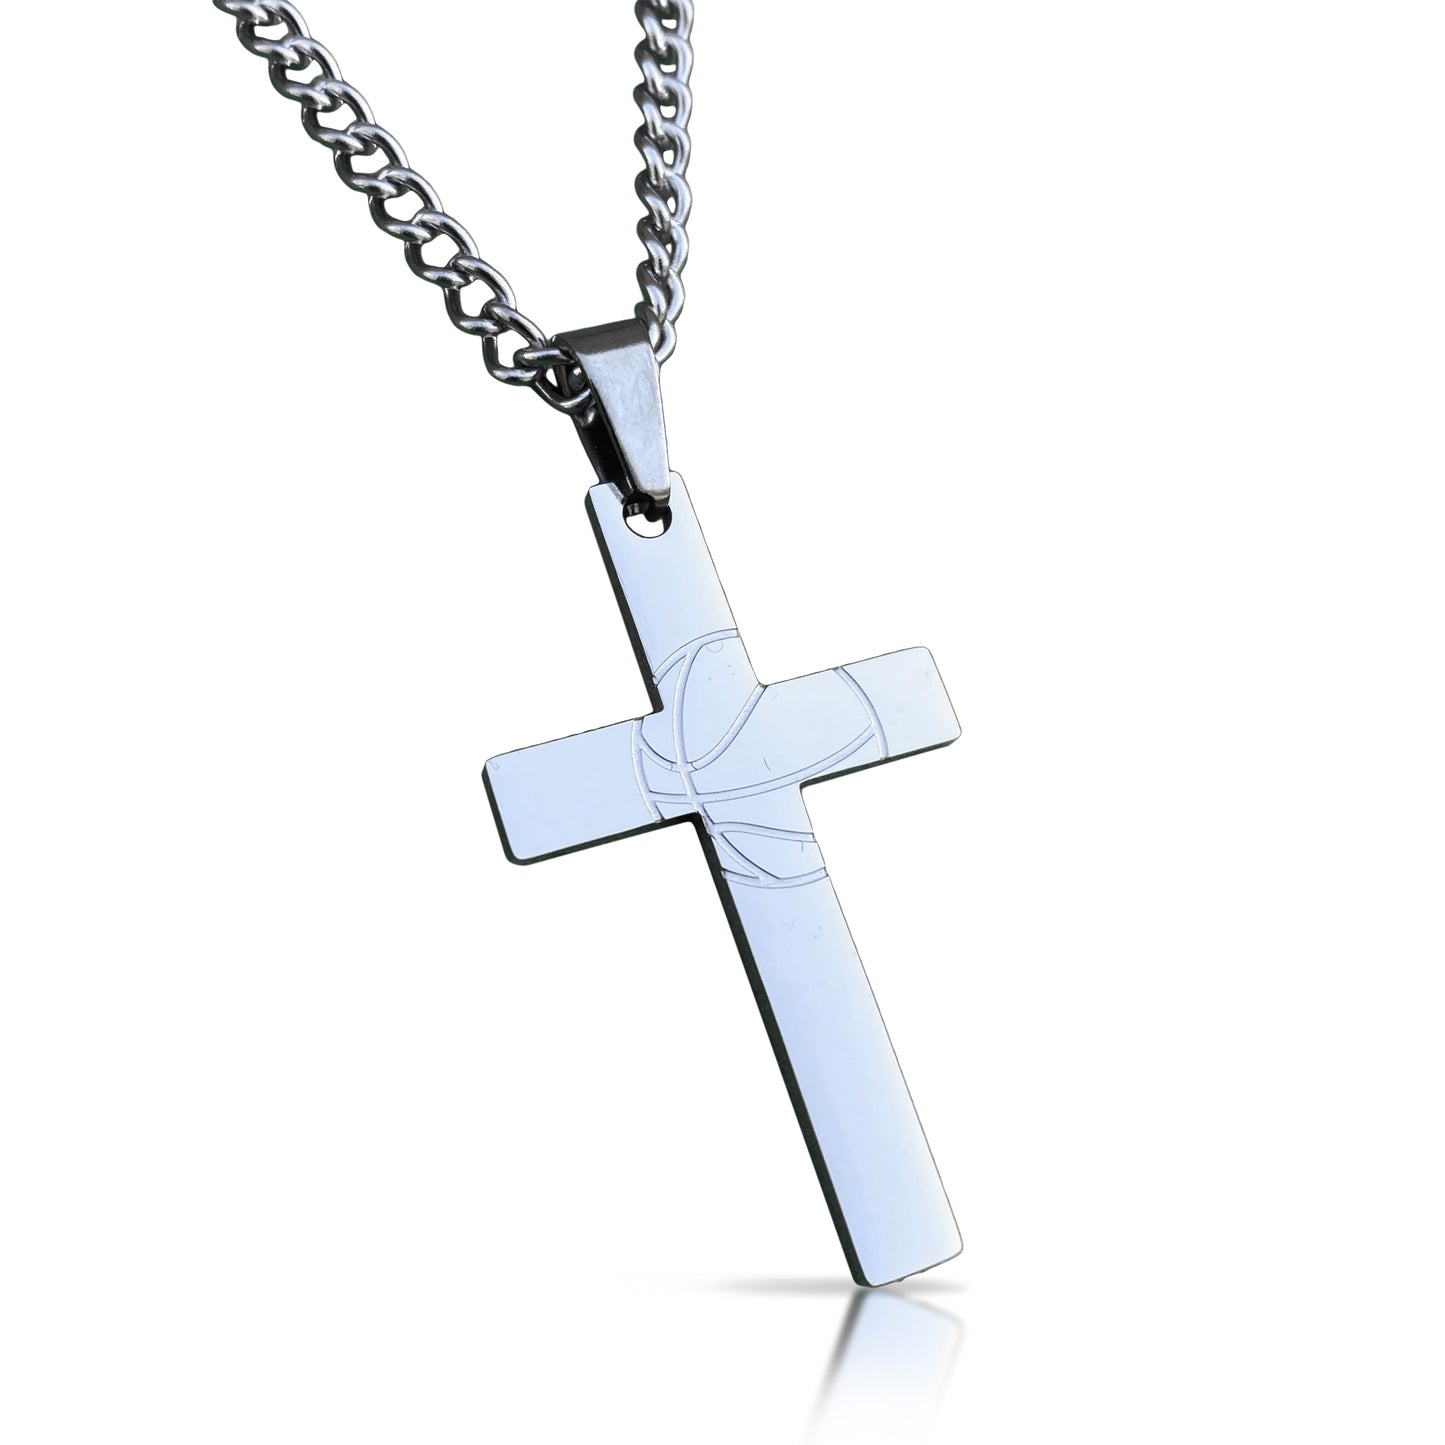 Basketball Cross Pendant With Chain Necklace - Stainless Steel